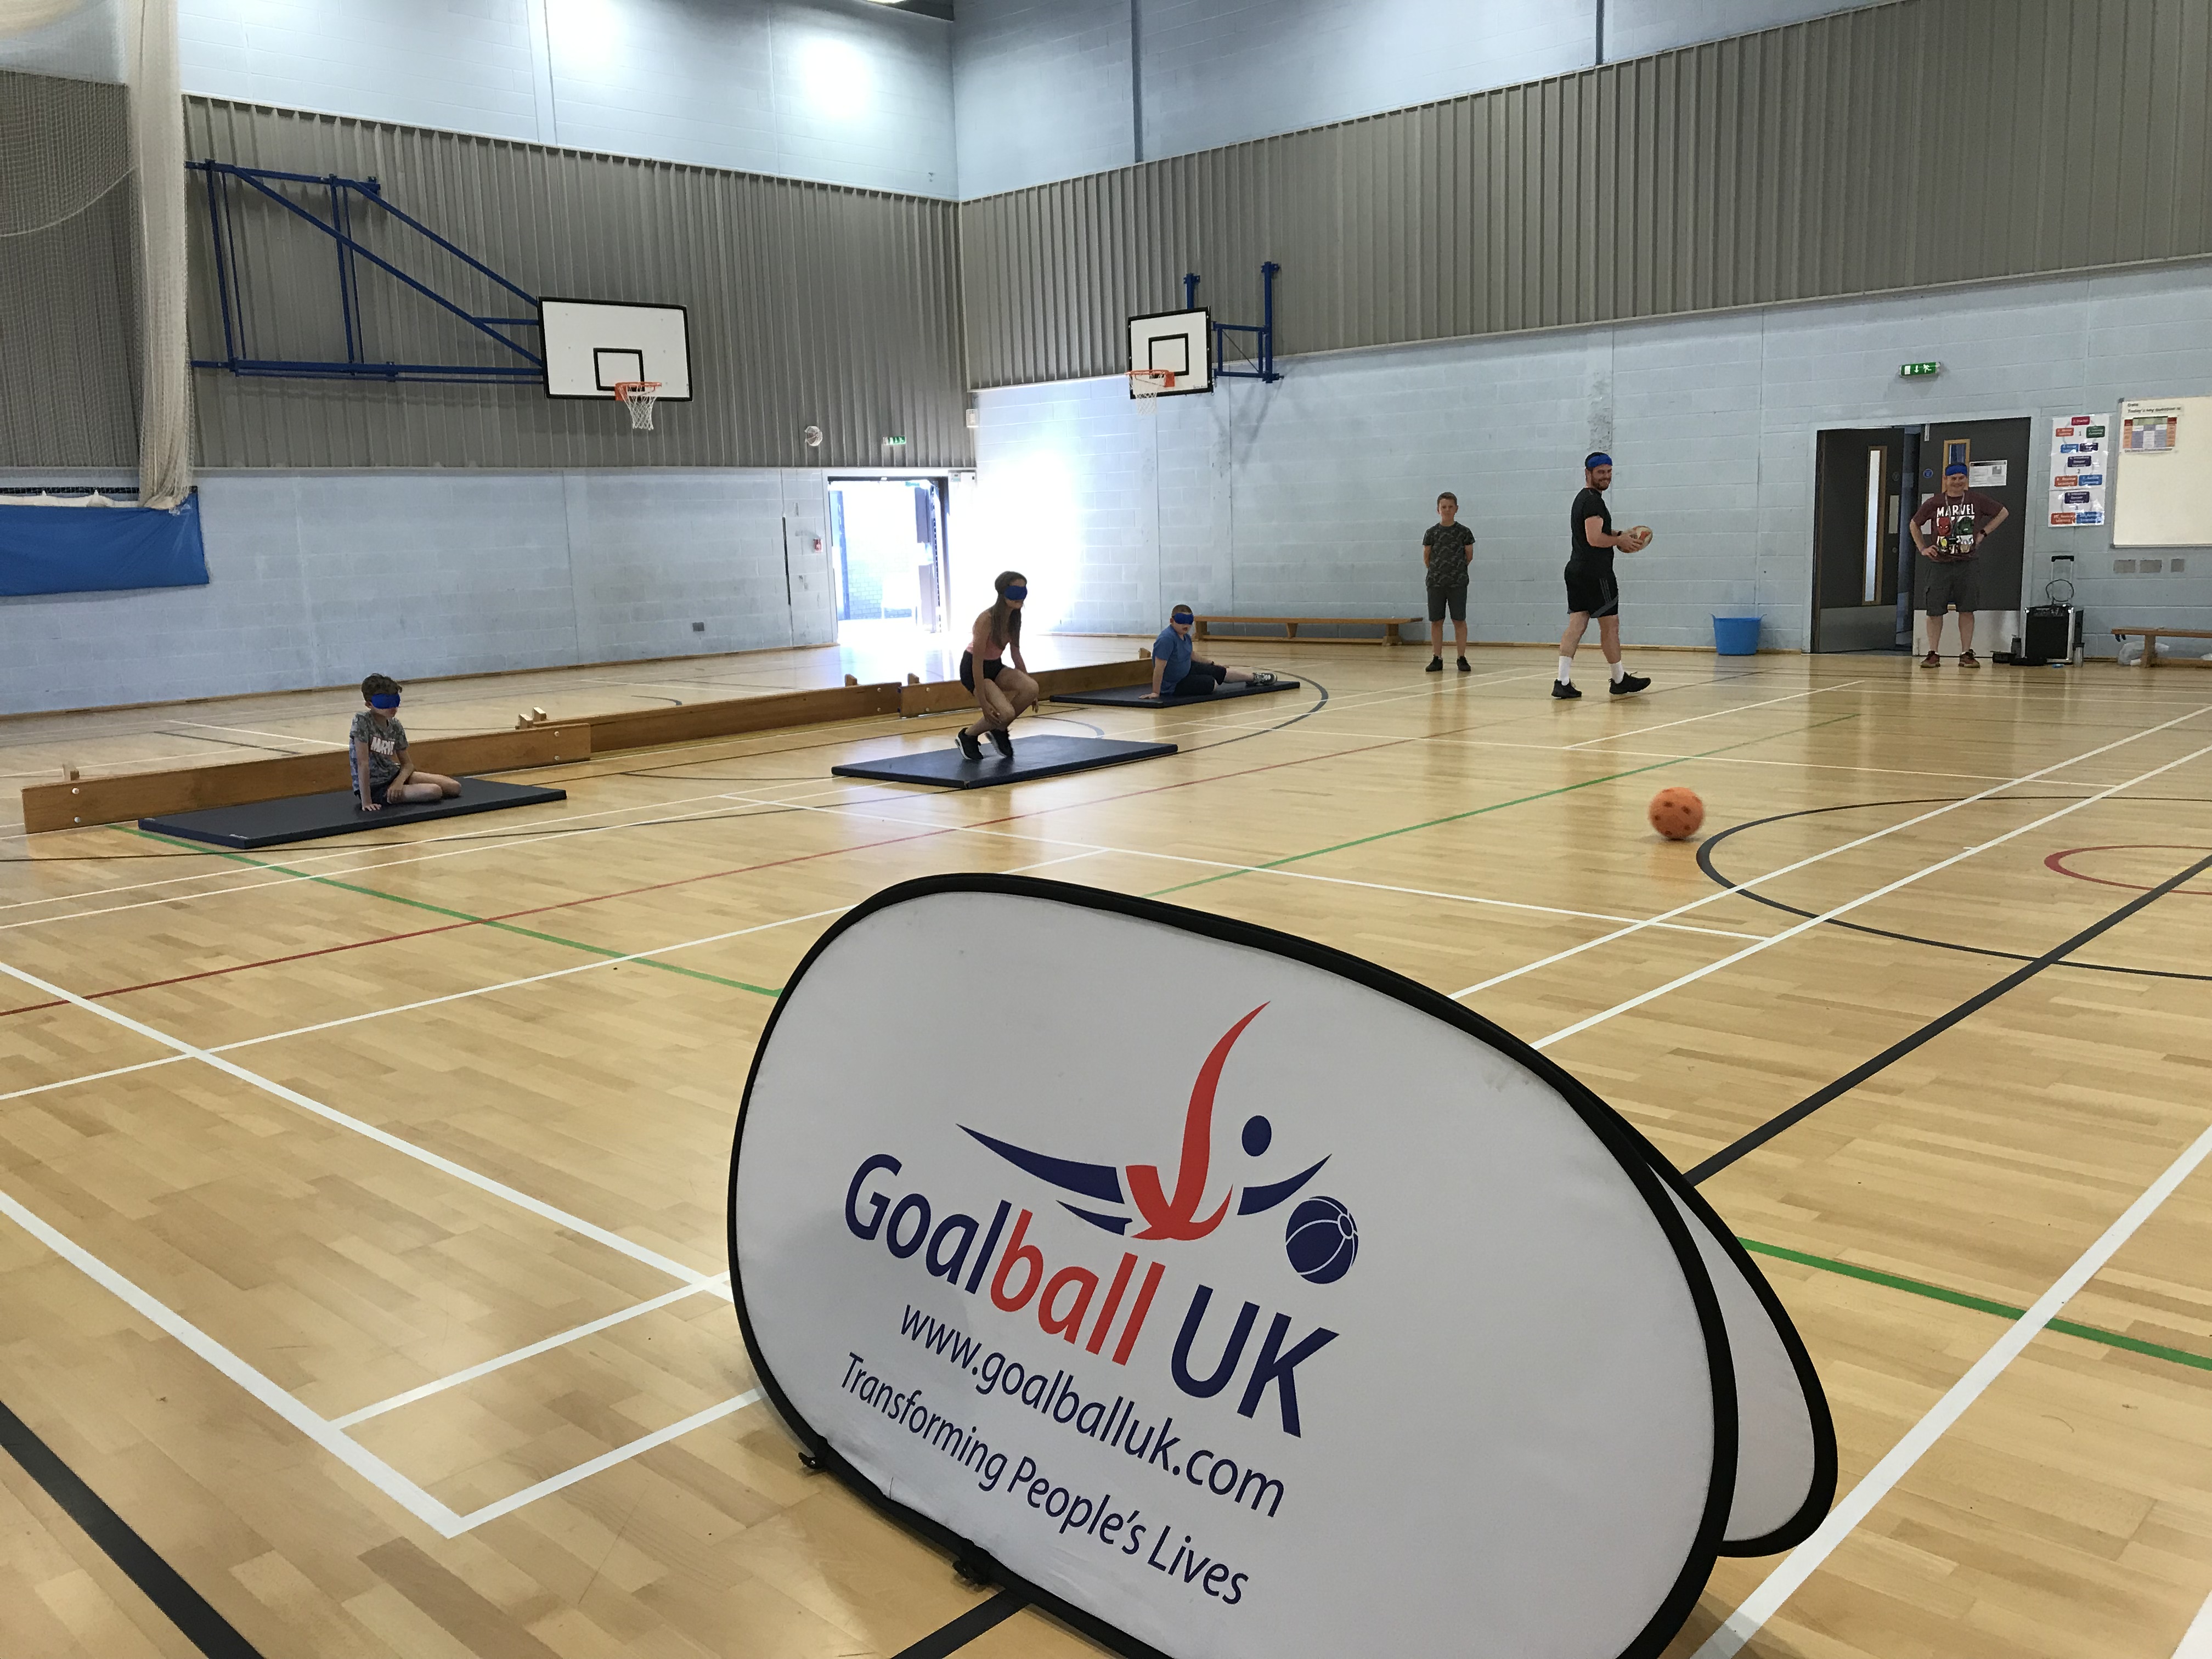 Action shot taken at school transition event, with Goalball UK banner in goreground